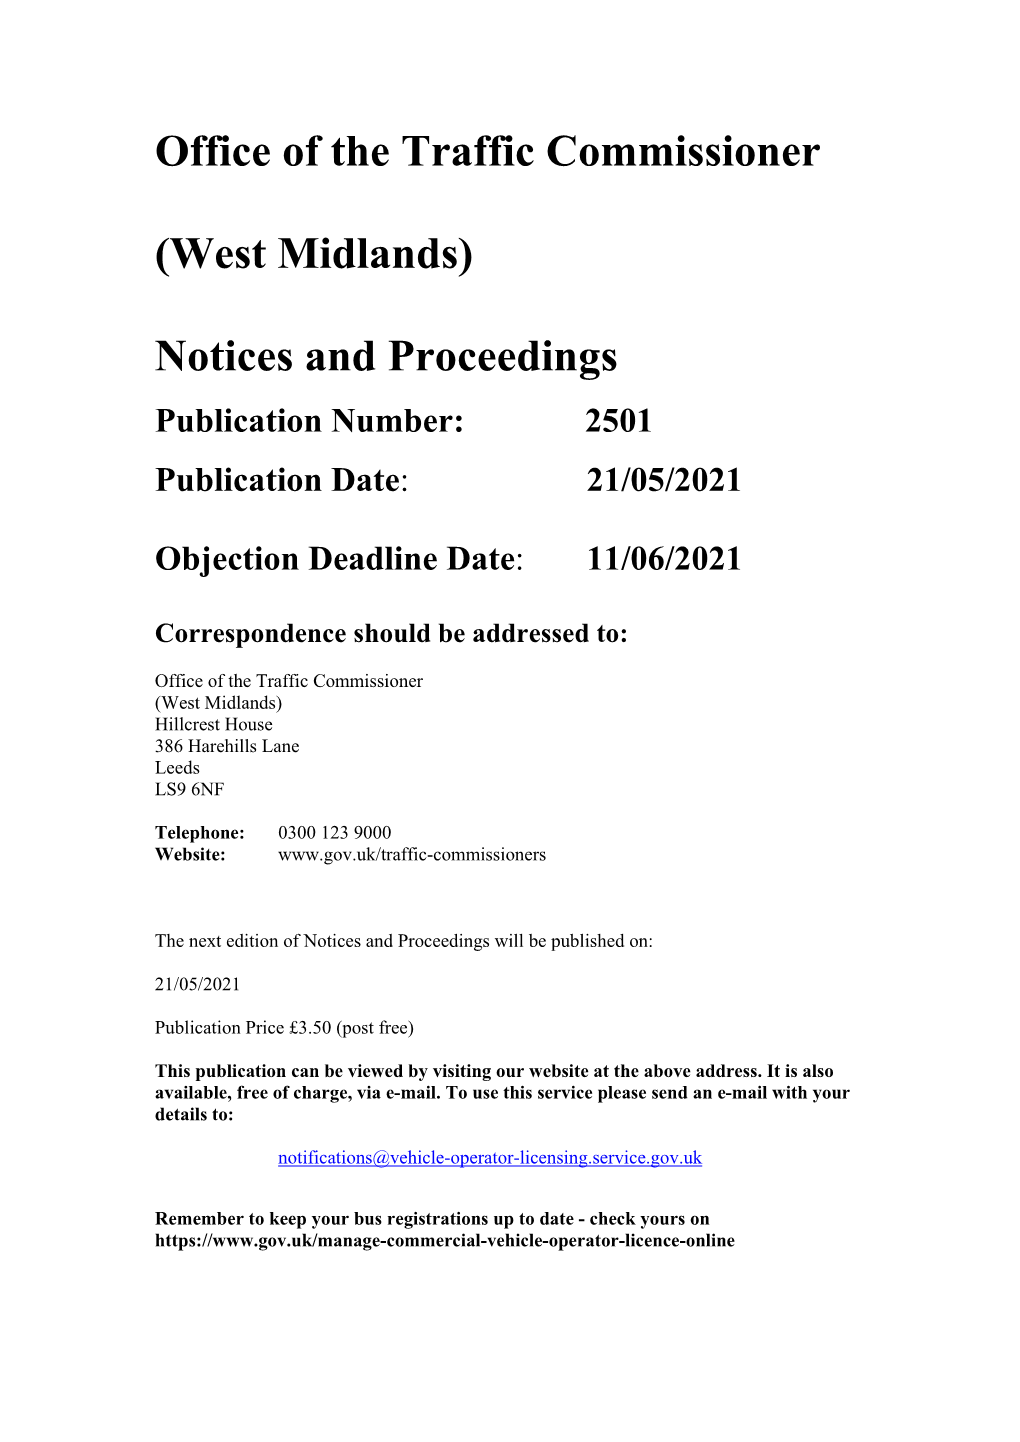 Office of the Traffic Commissioner (West Midlands) Notices